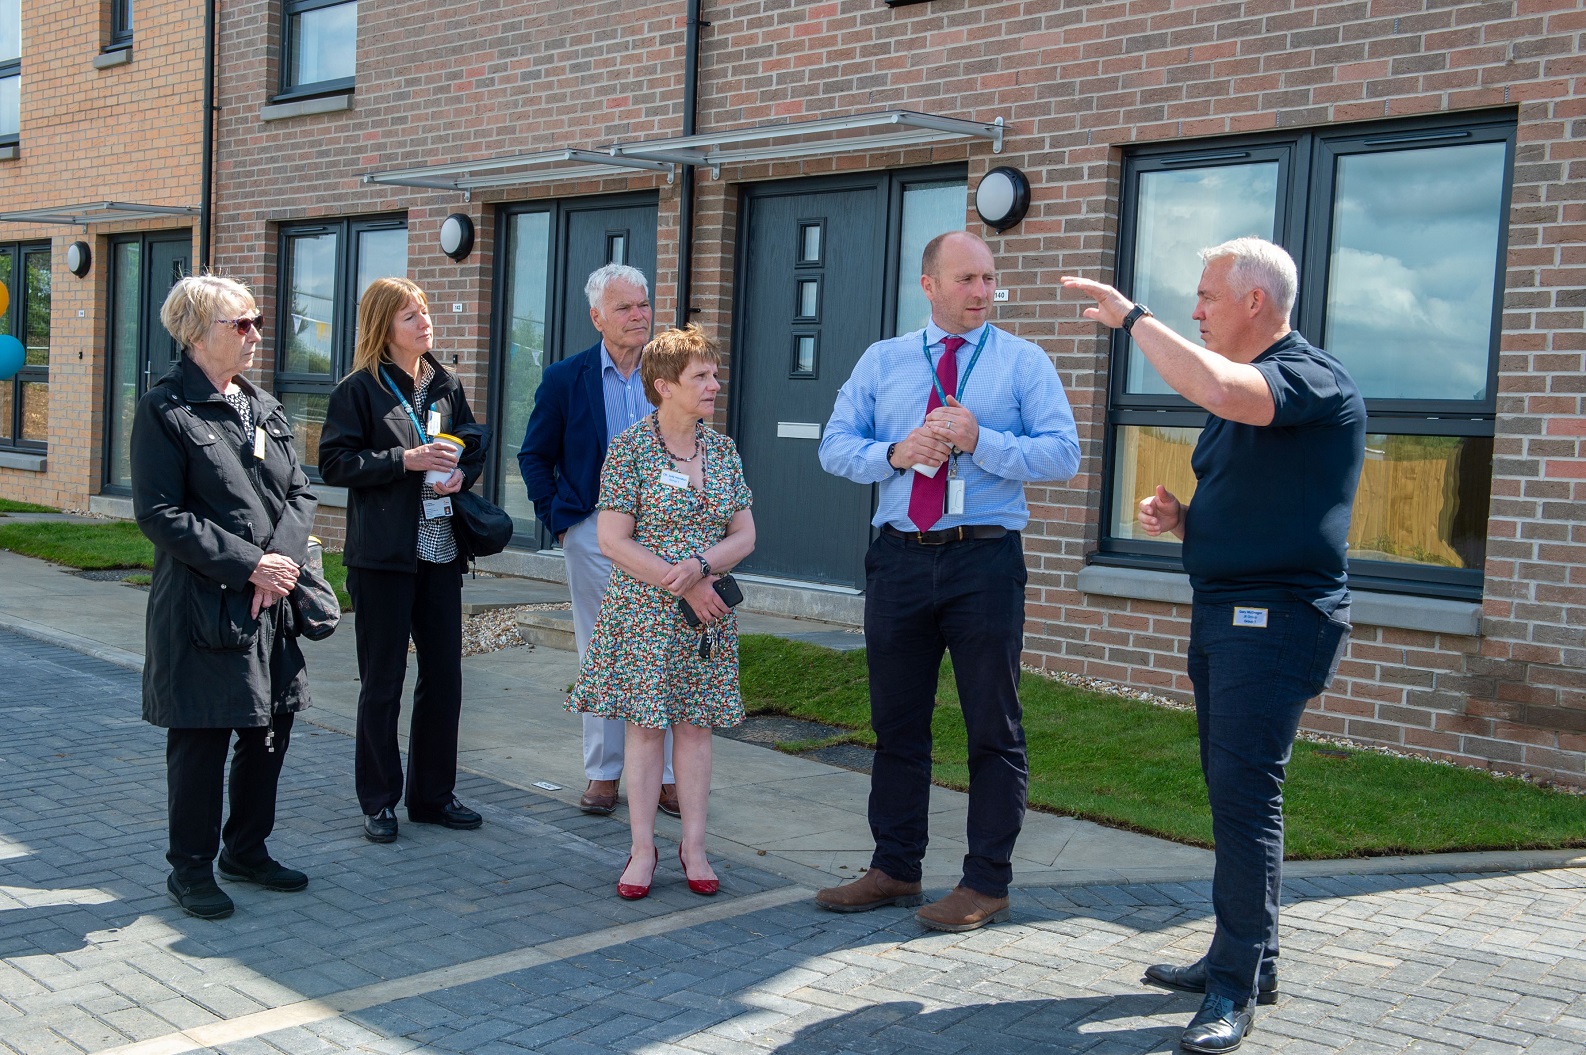 JR Group completes new sustainable development in Kirkcaldy